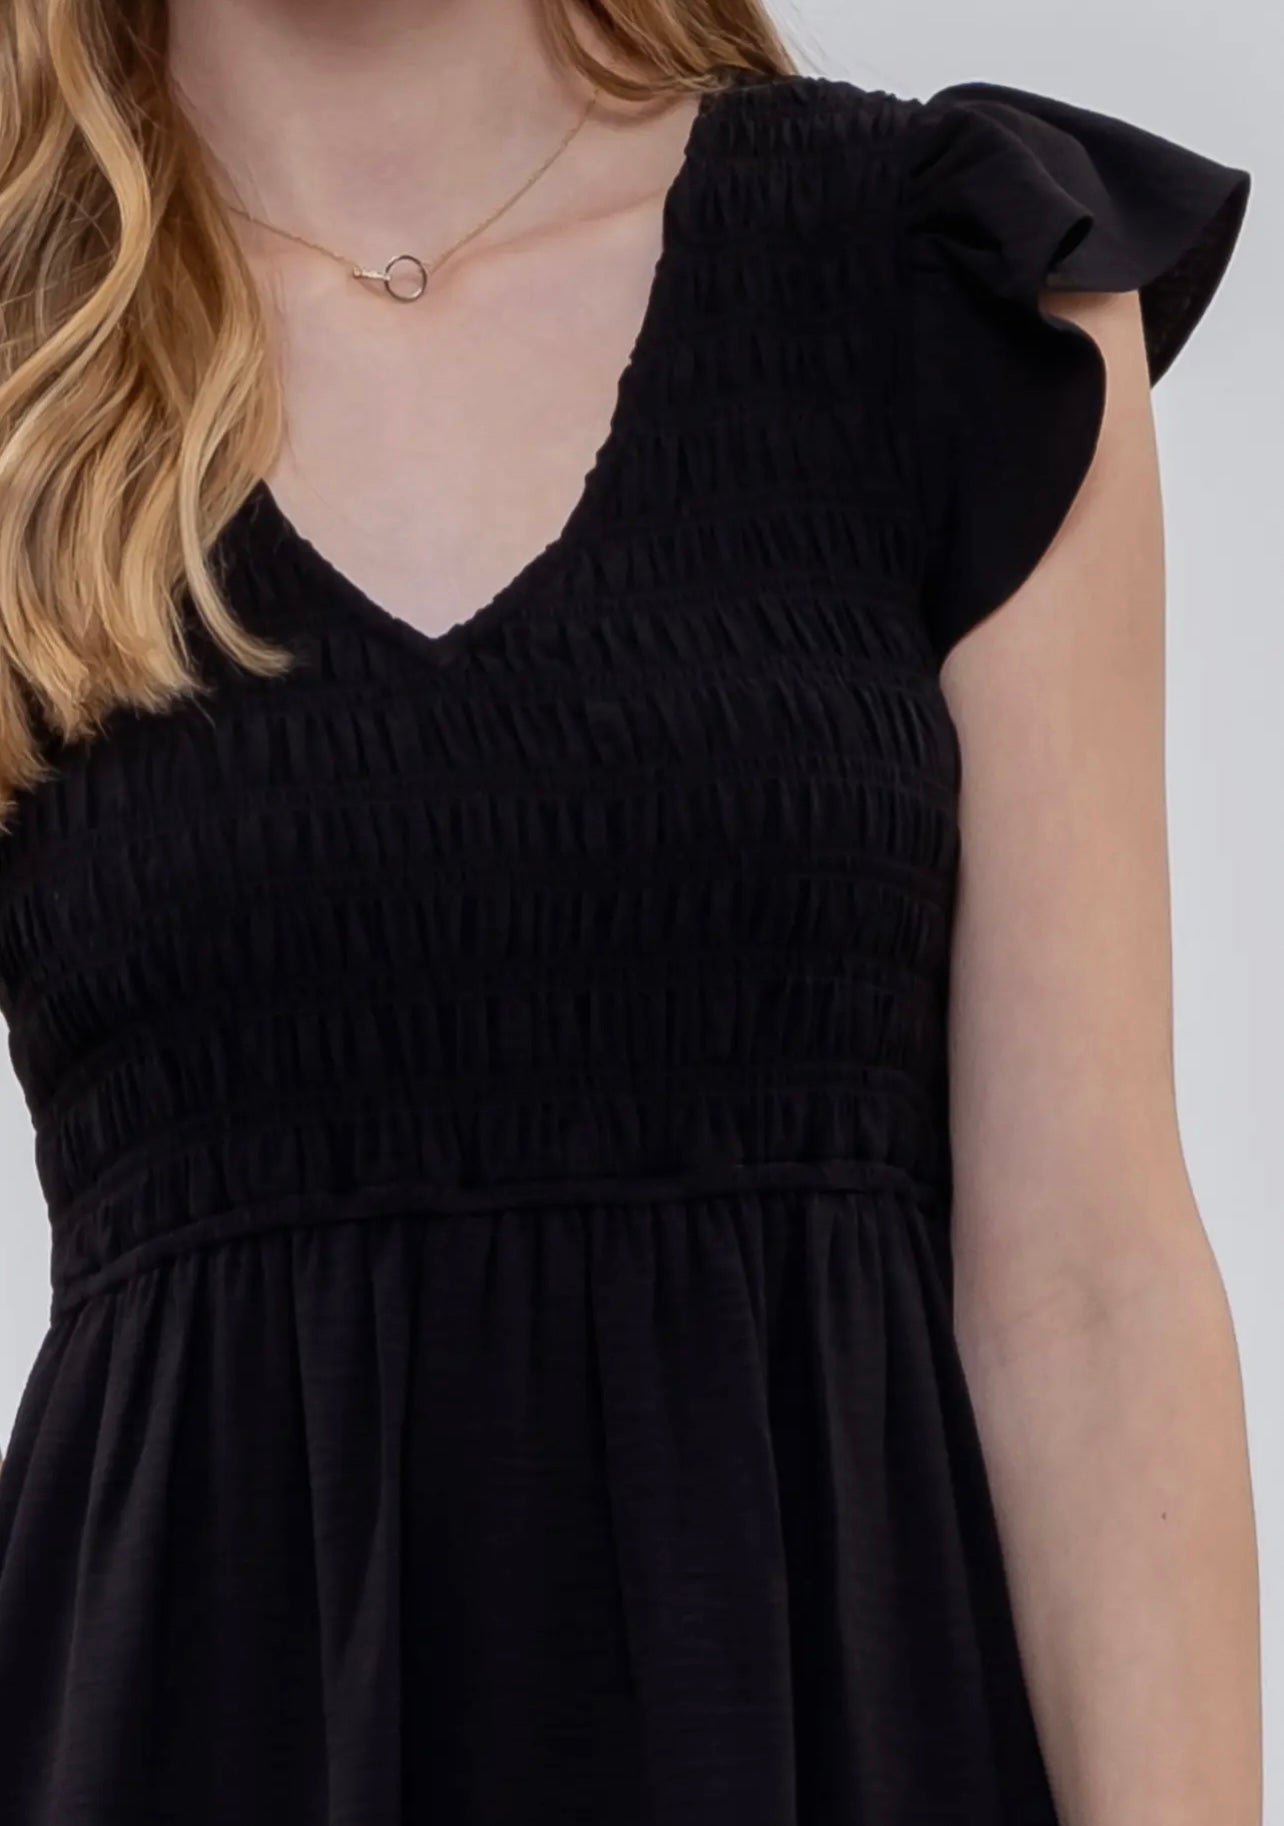 The One And Only Summer Black Dress